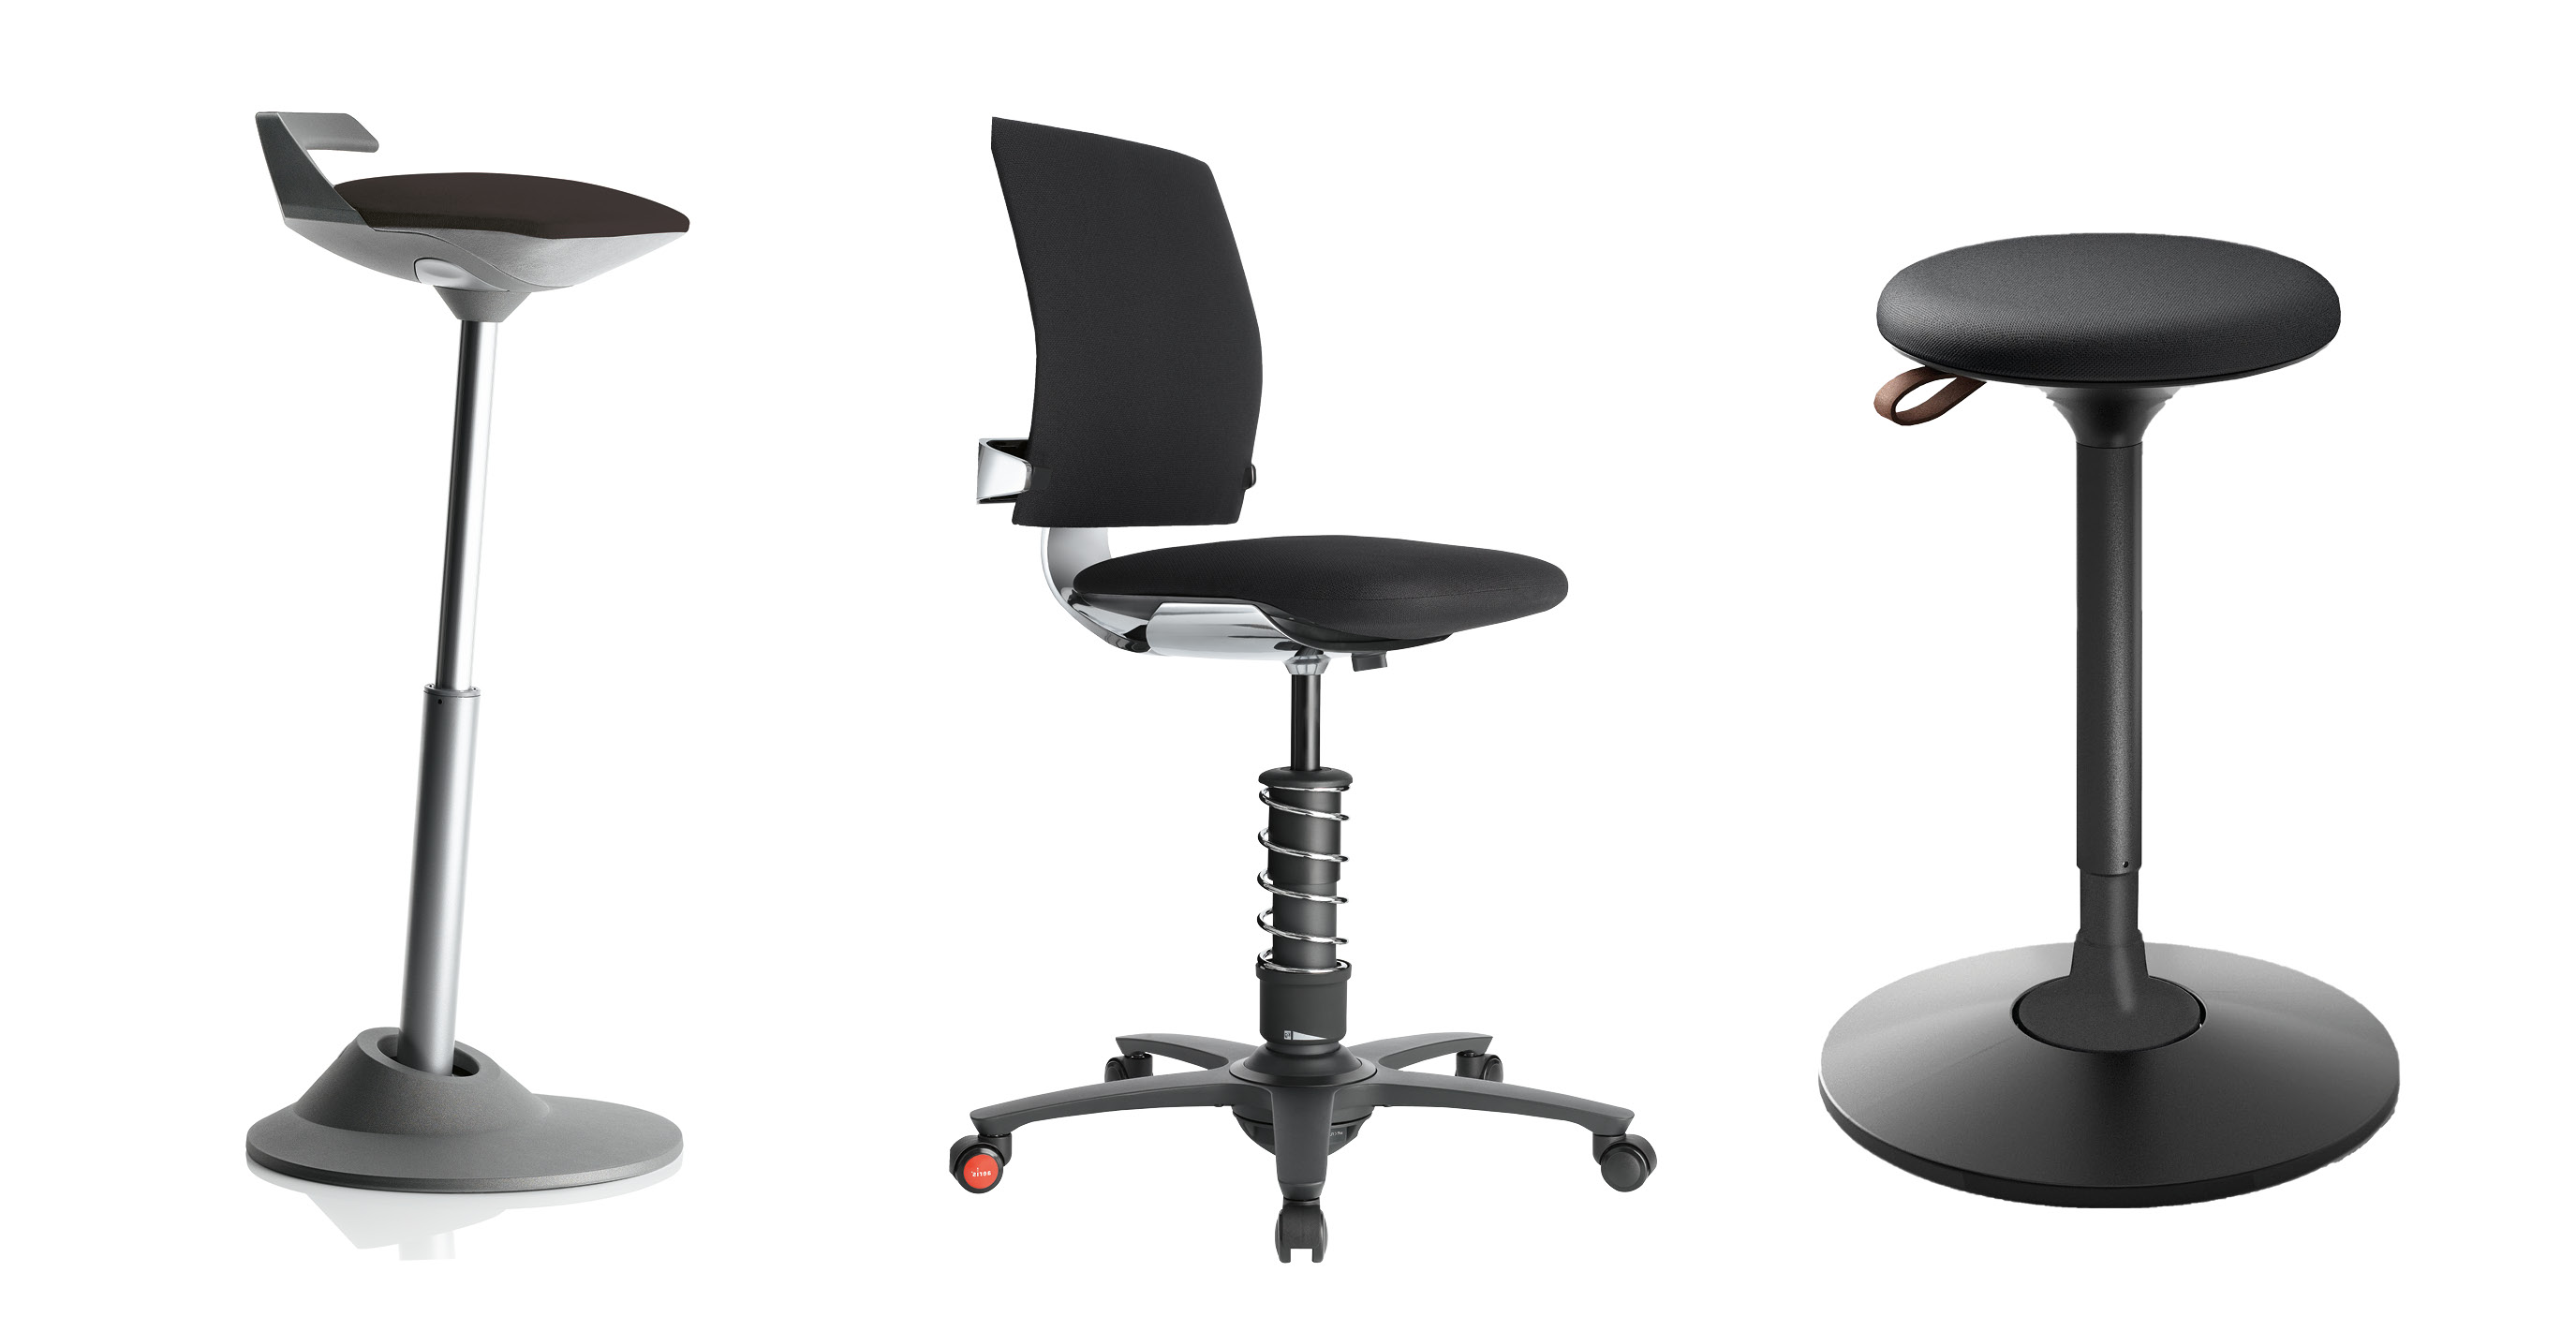 Muvman Stool, 3Dee Active Office Chair and Cloonch Standing Seat